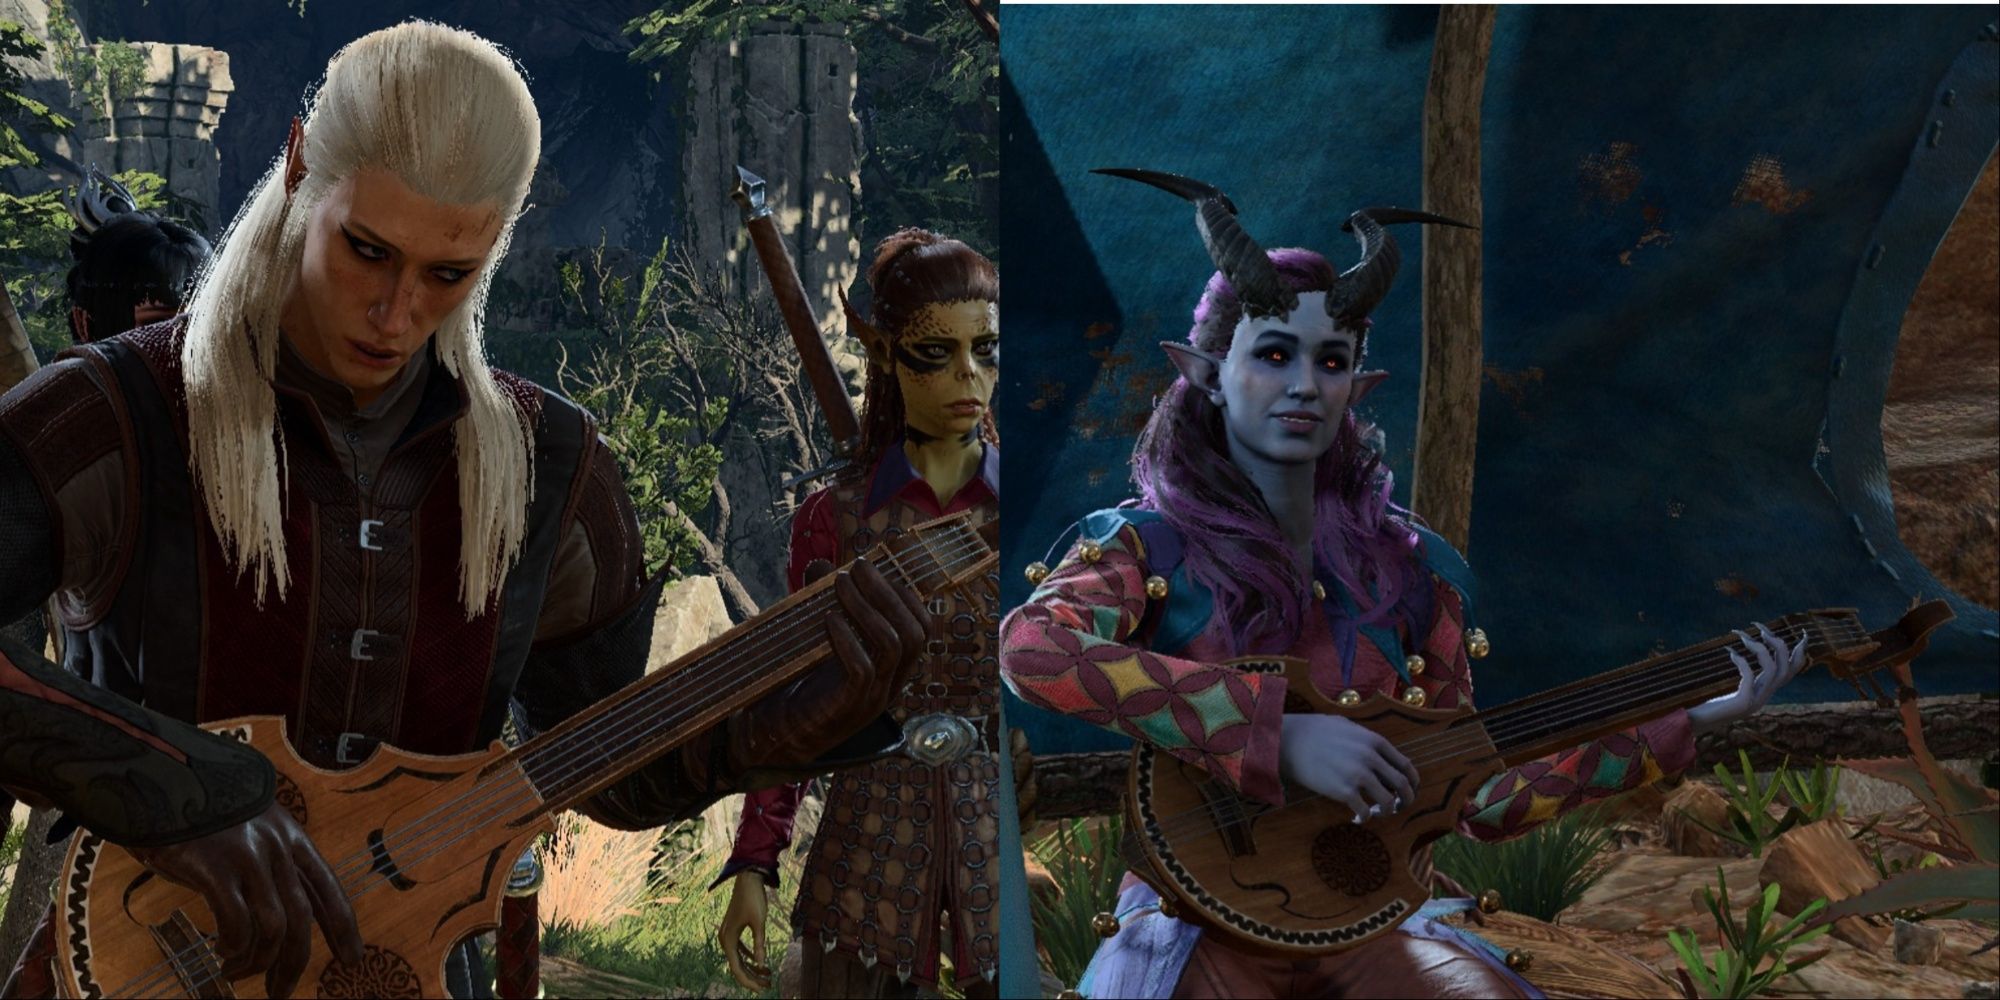 A split image of the player character and Alfira playing lutes in Baldur's Gate 3 